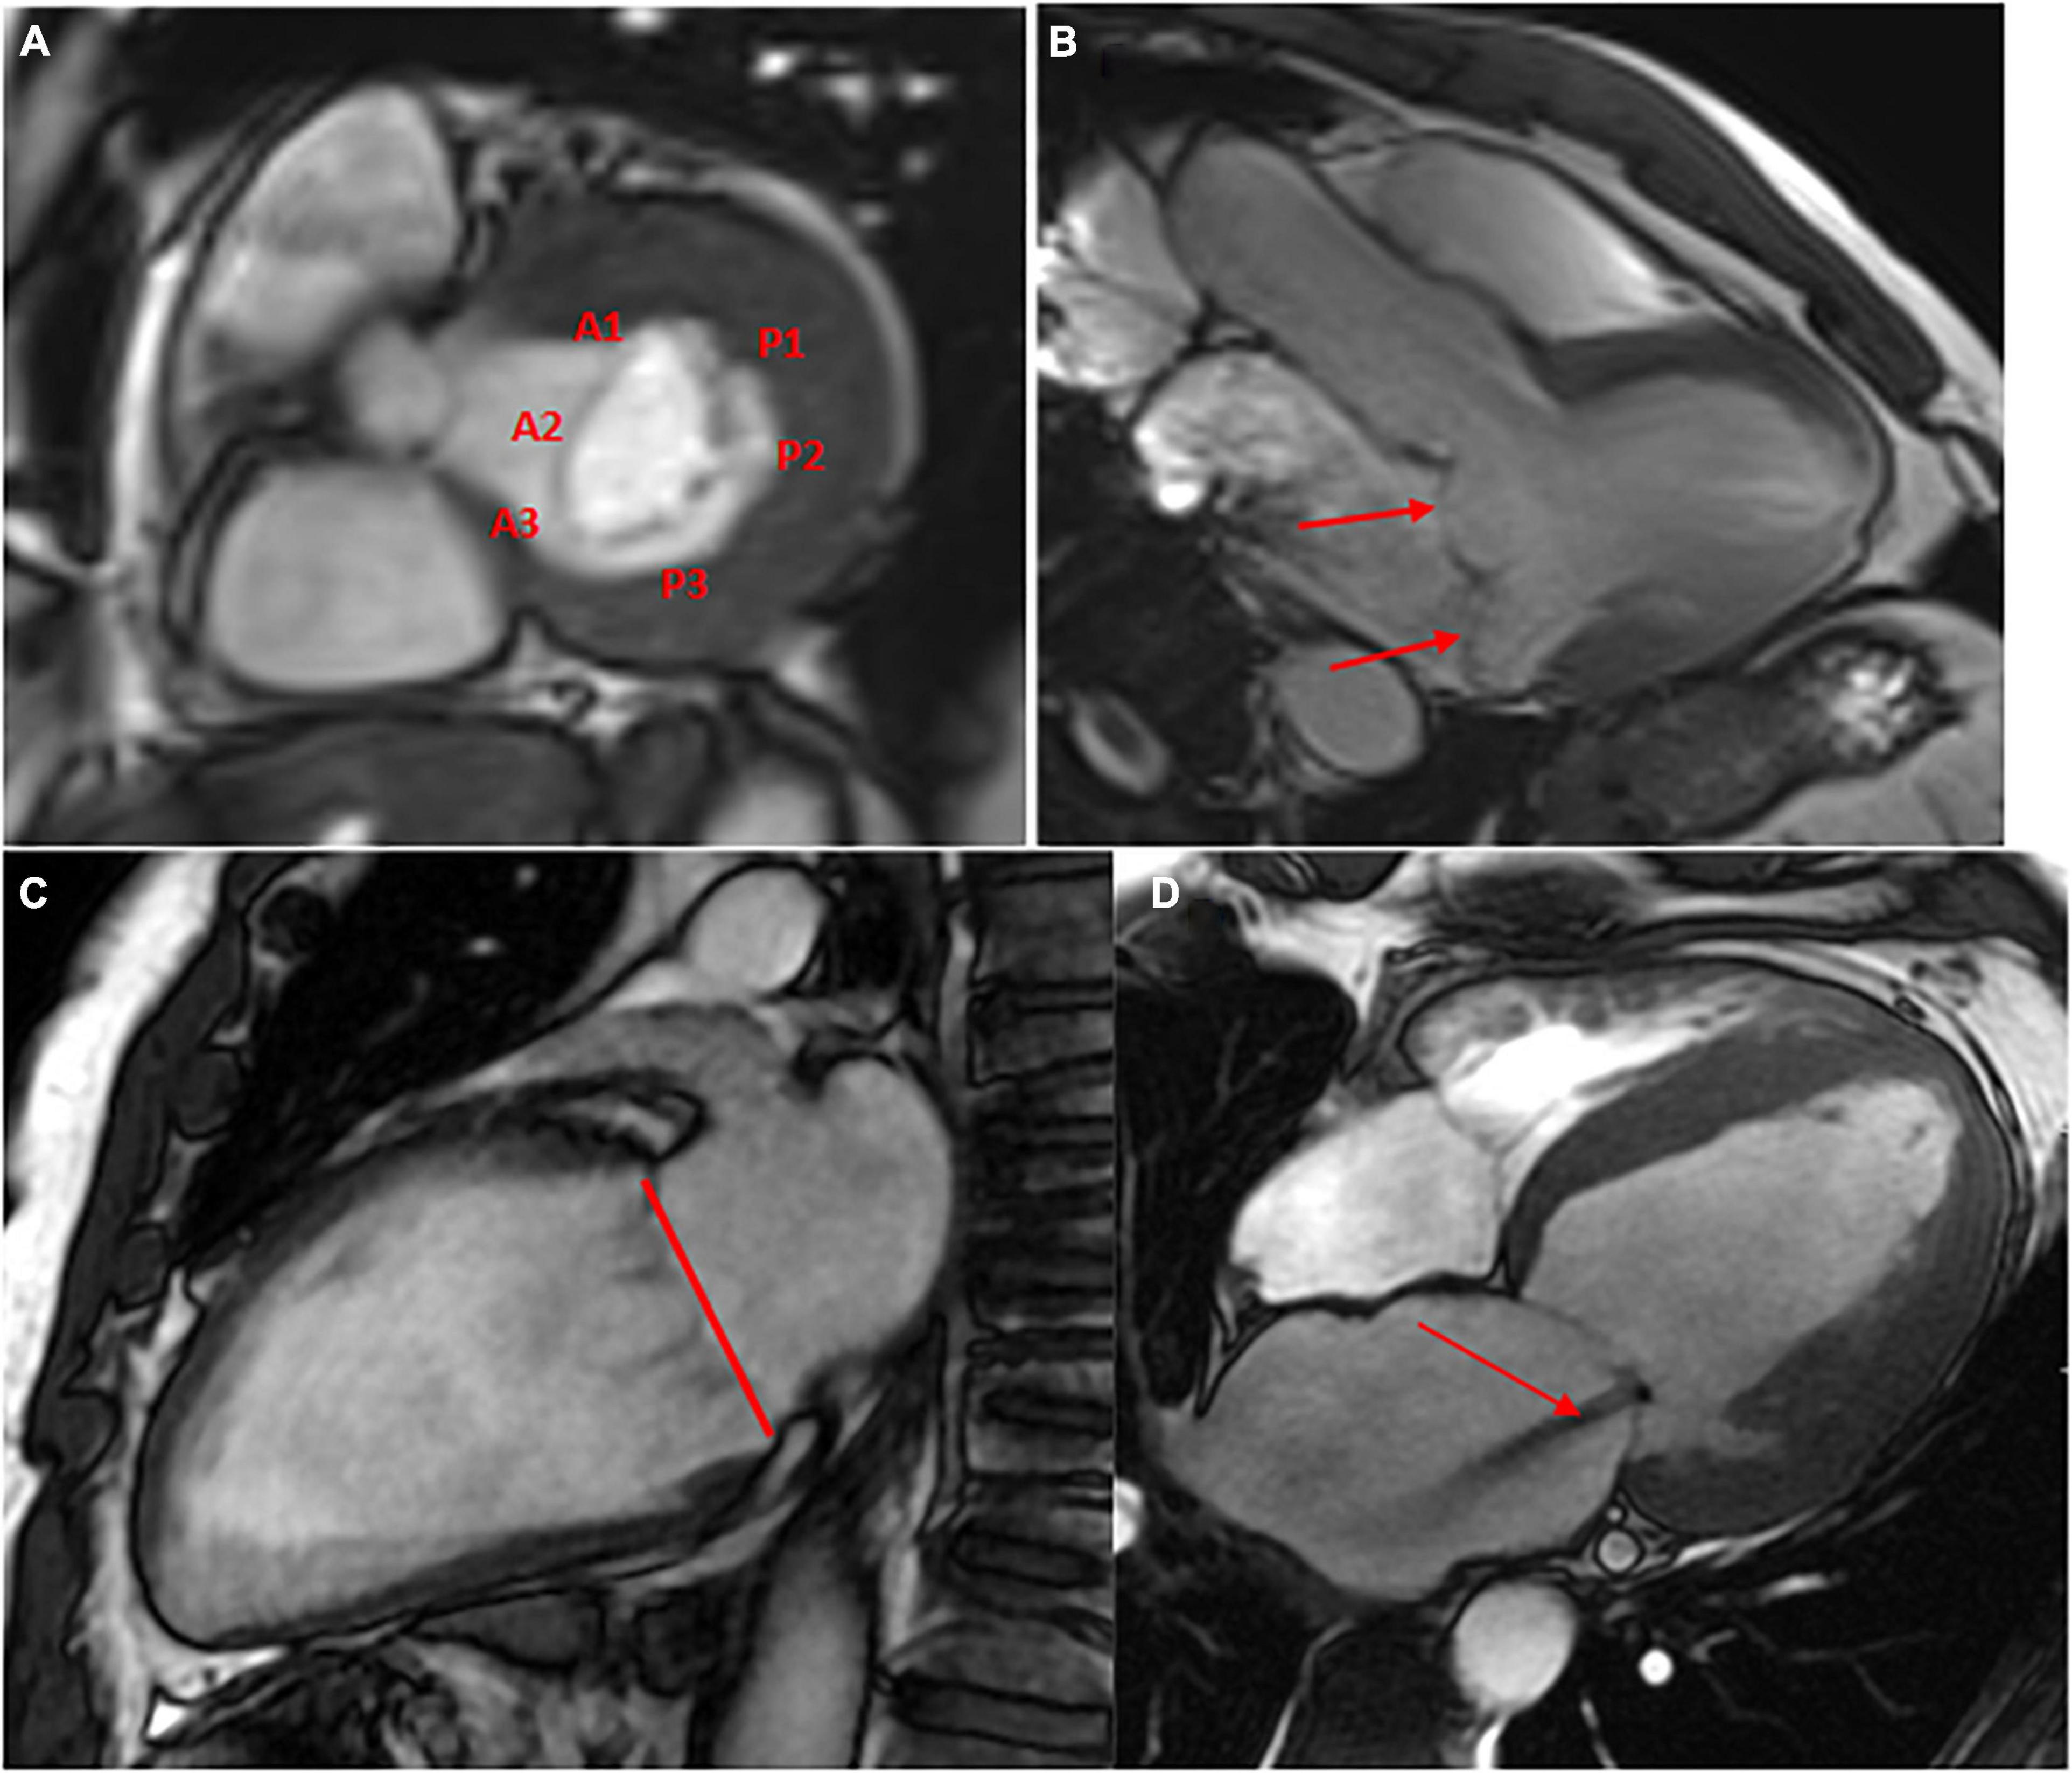 Direct mitral regurgitation quantification in hypertrophic cardiomyopathy  using 4D flow CMR jet tracking: evaluation in comparison to conventional  CMR, Journal of Cardiovascular Magnetic Resonance